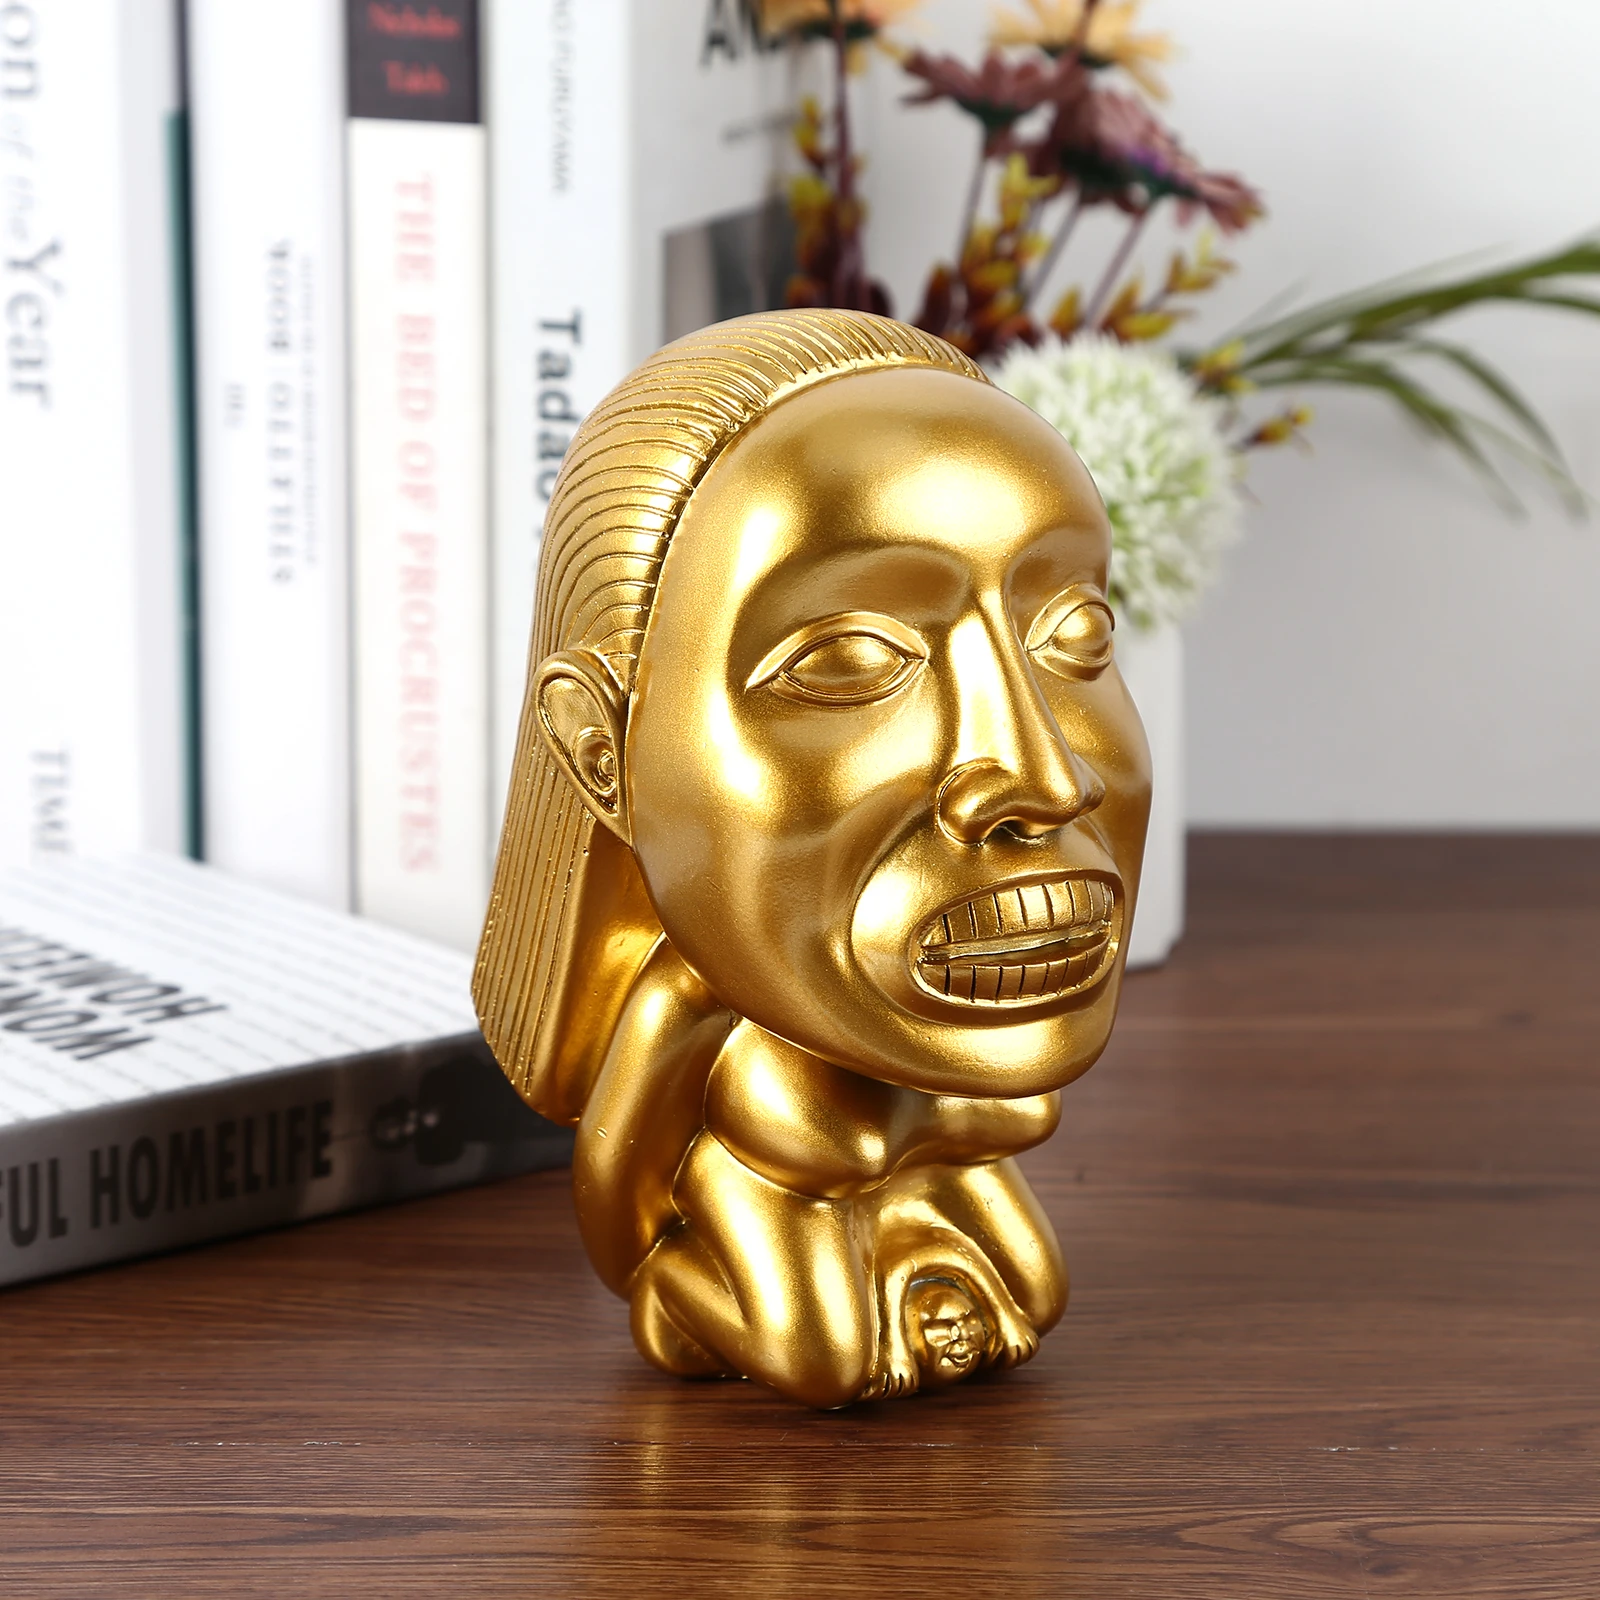 Indiana Jones Idol Golden Fertility Statue Resin Fertility Idol Sculpture with Eye Scale Raiders of The Lost Ark Cosplay Props images - 6